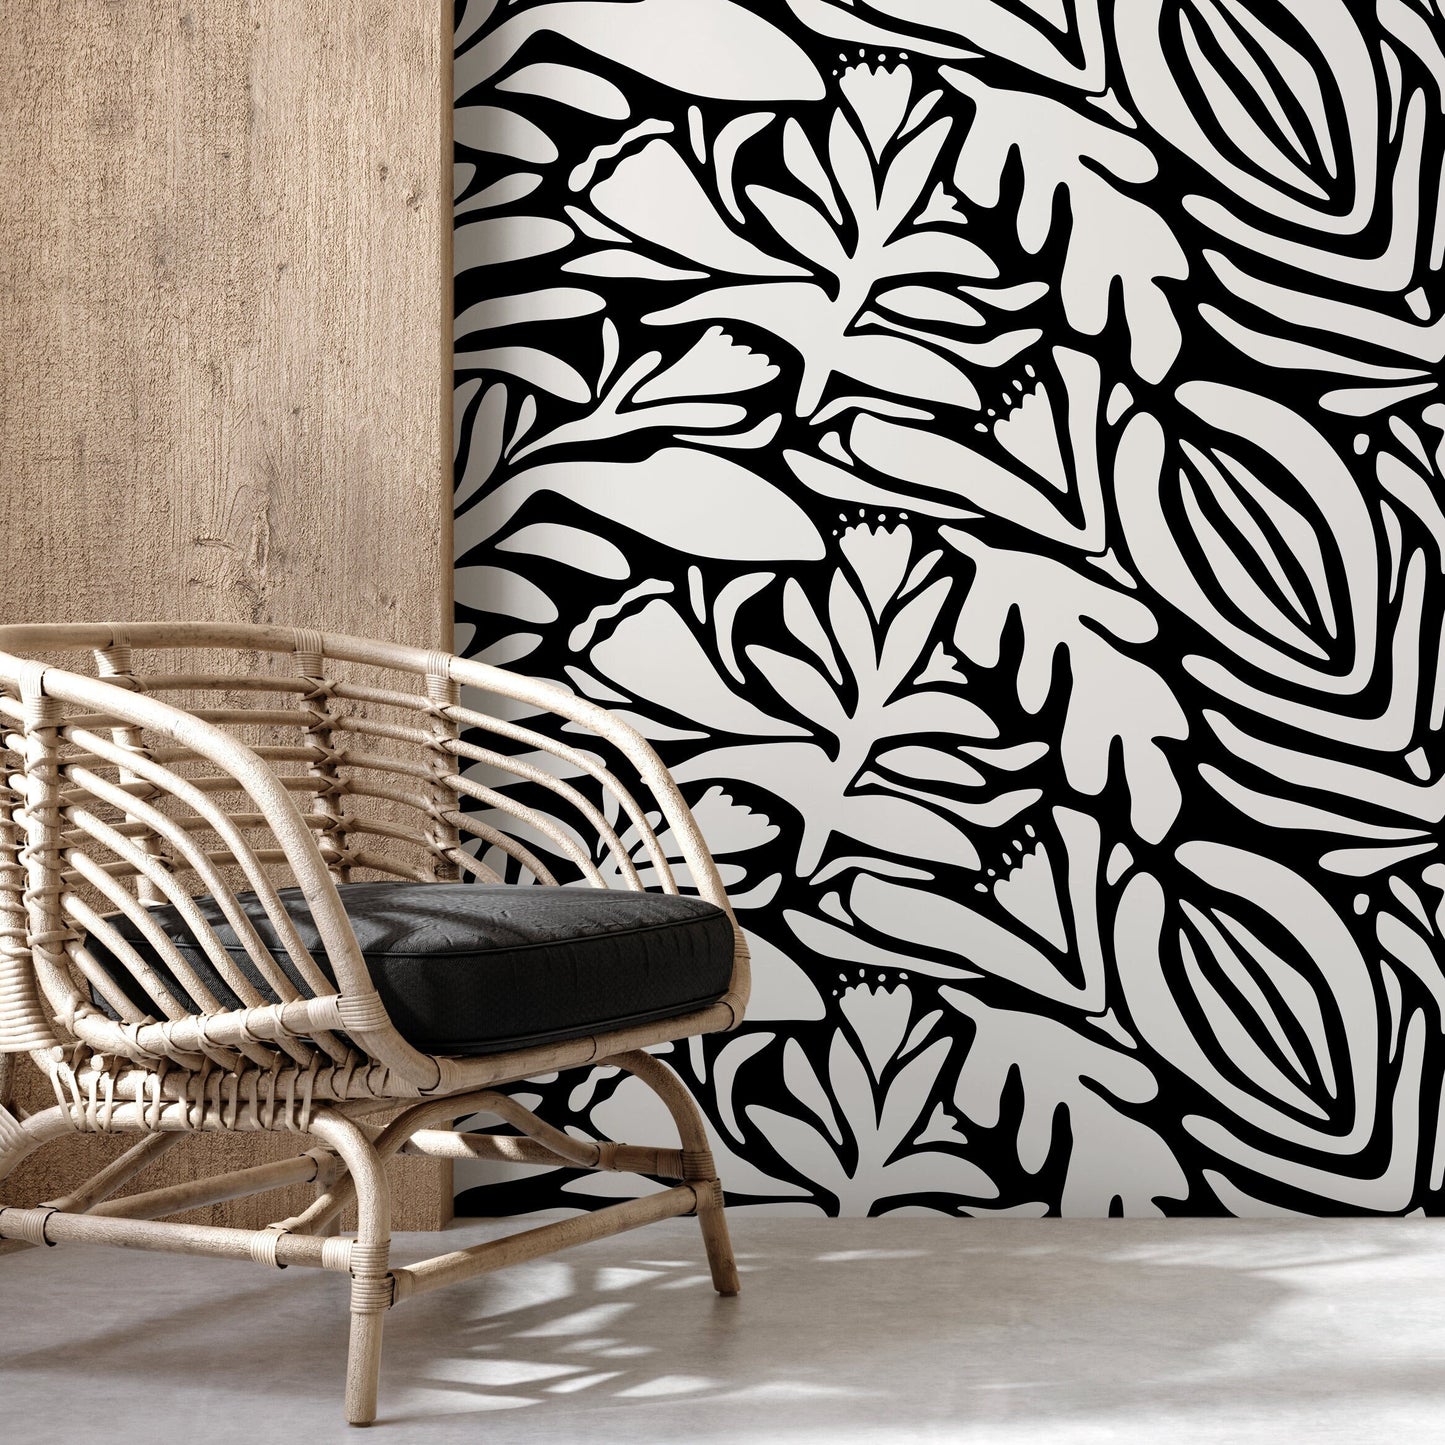 Black and White Floral Wallpaper Abstract Wallpaper Peel and Stick and Traditional Wallpaper - D703